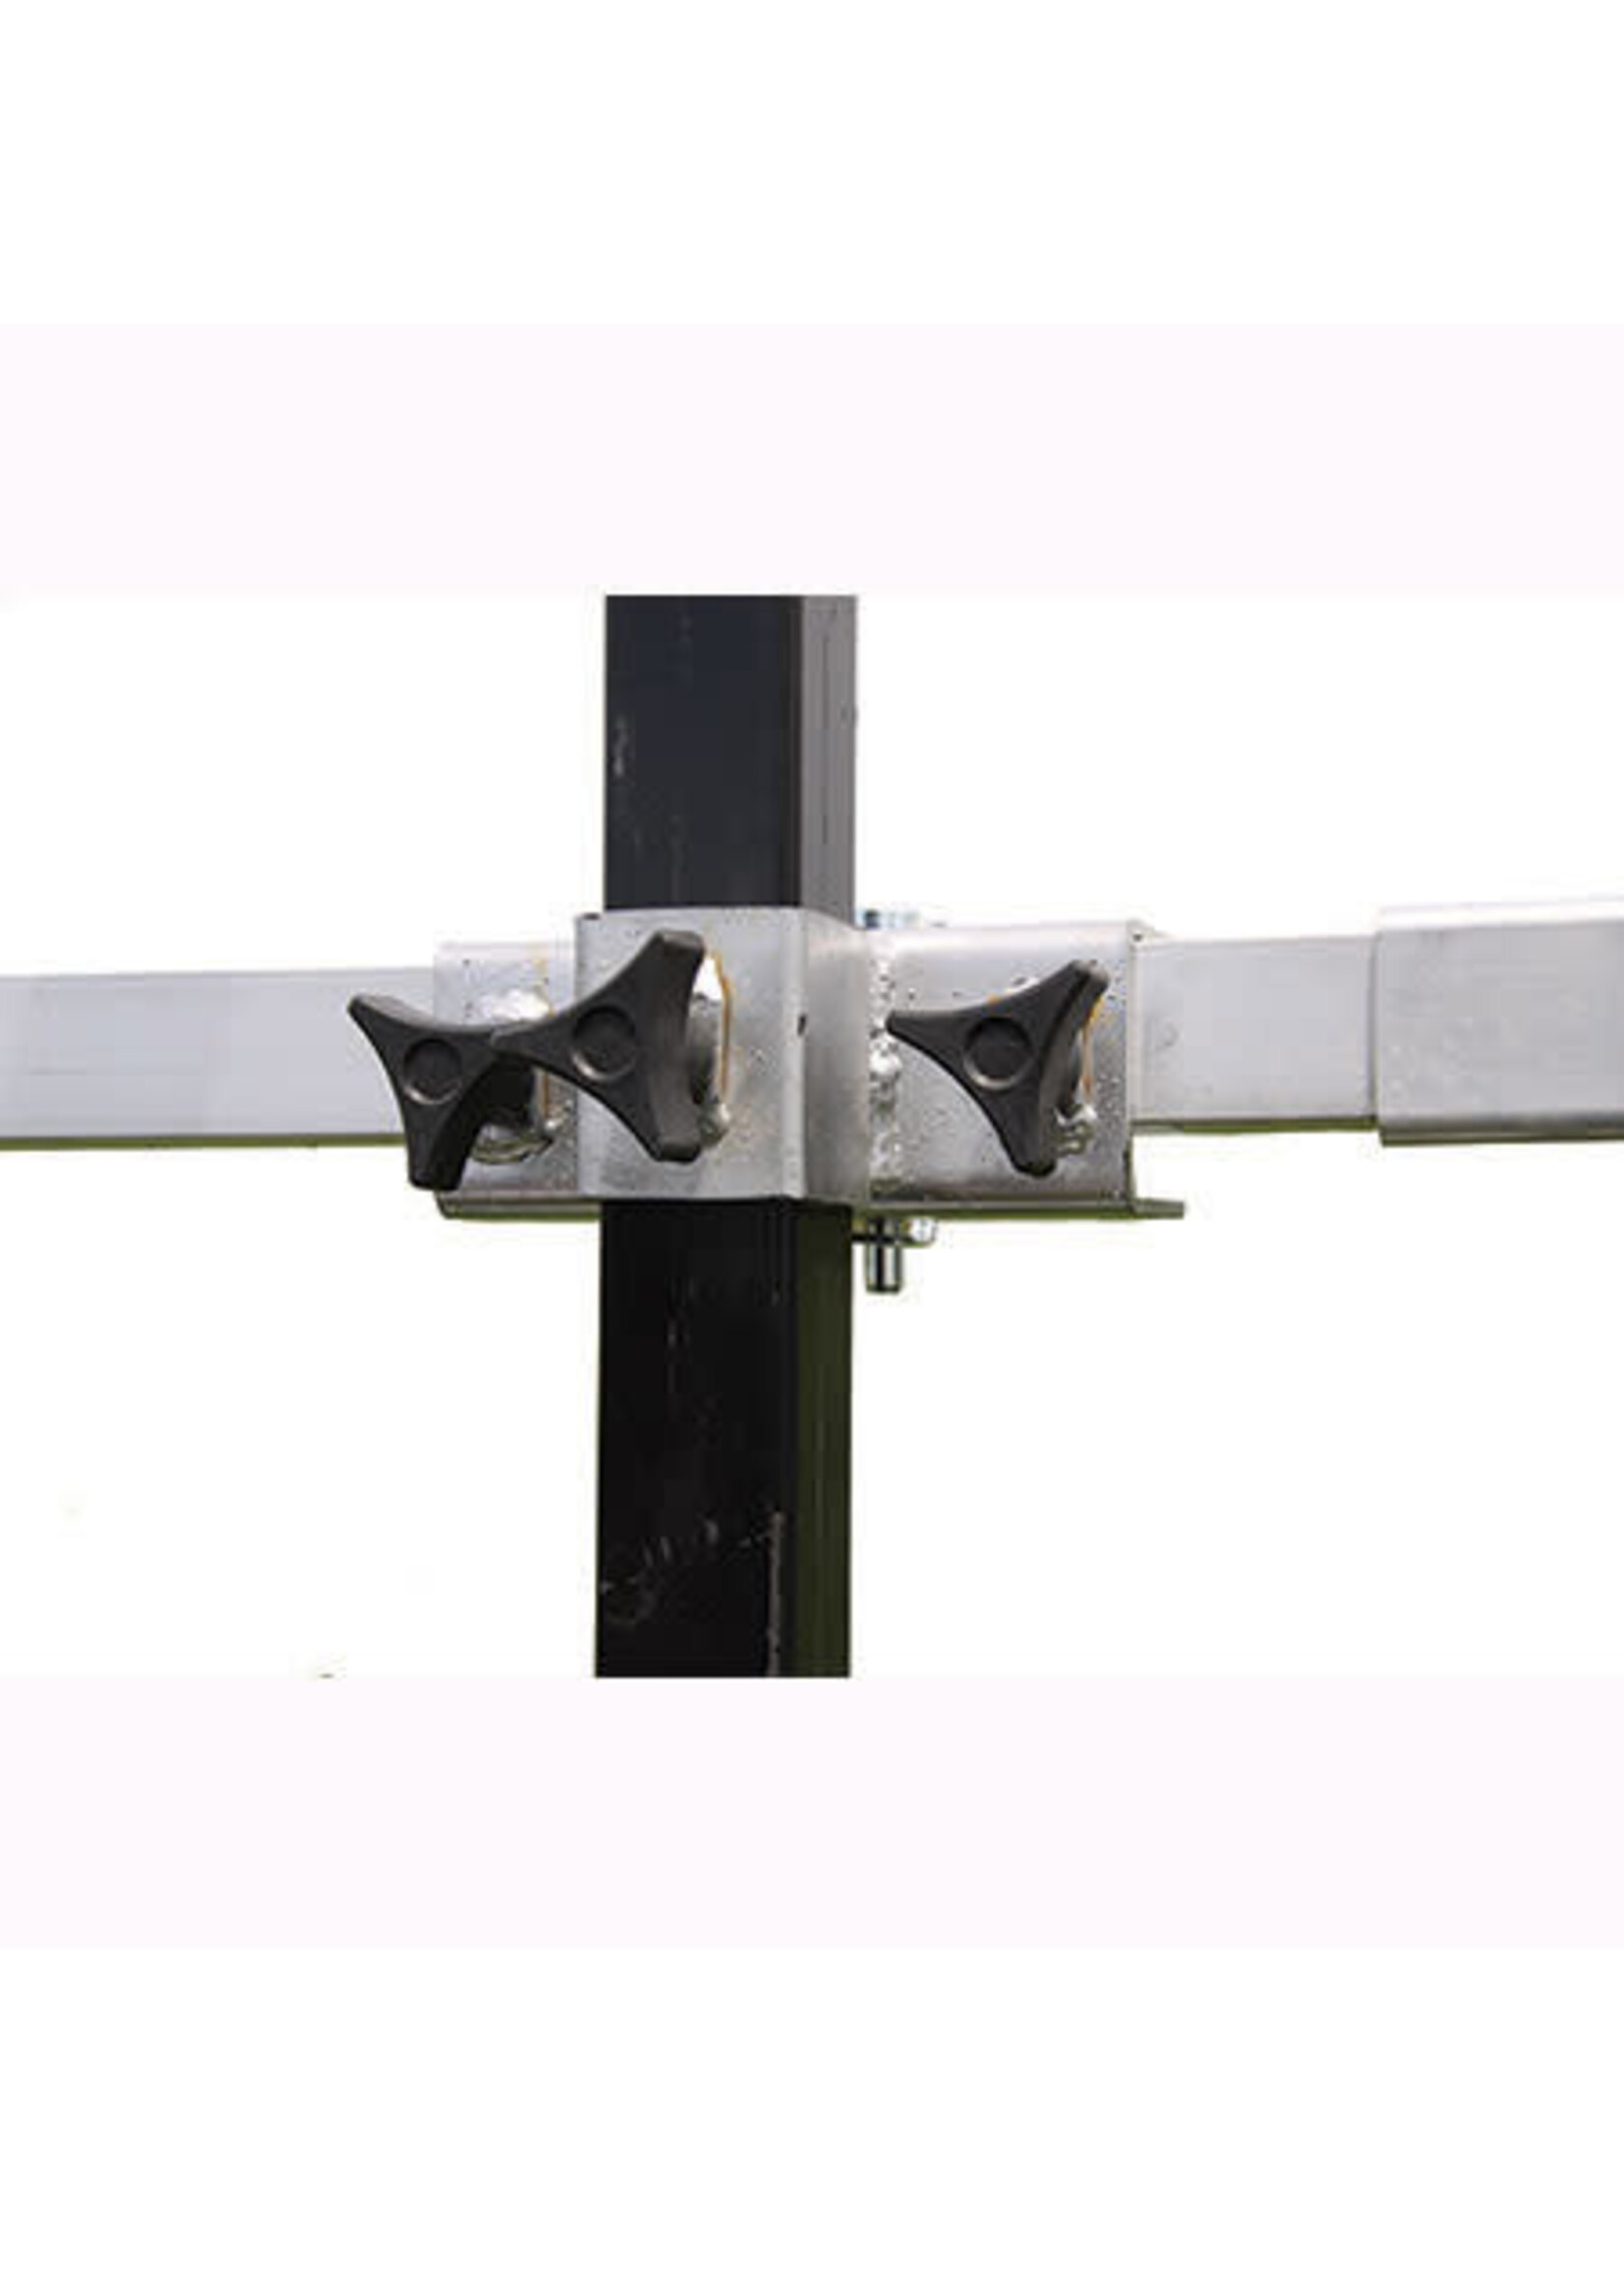 Sullivan Supply Sullivans Fan Stand Bracket for Alum. Front Panel (upright fan stand steel to connect)